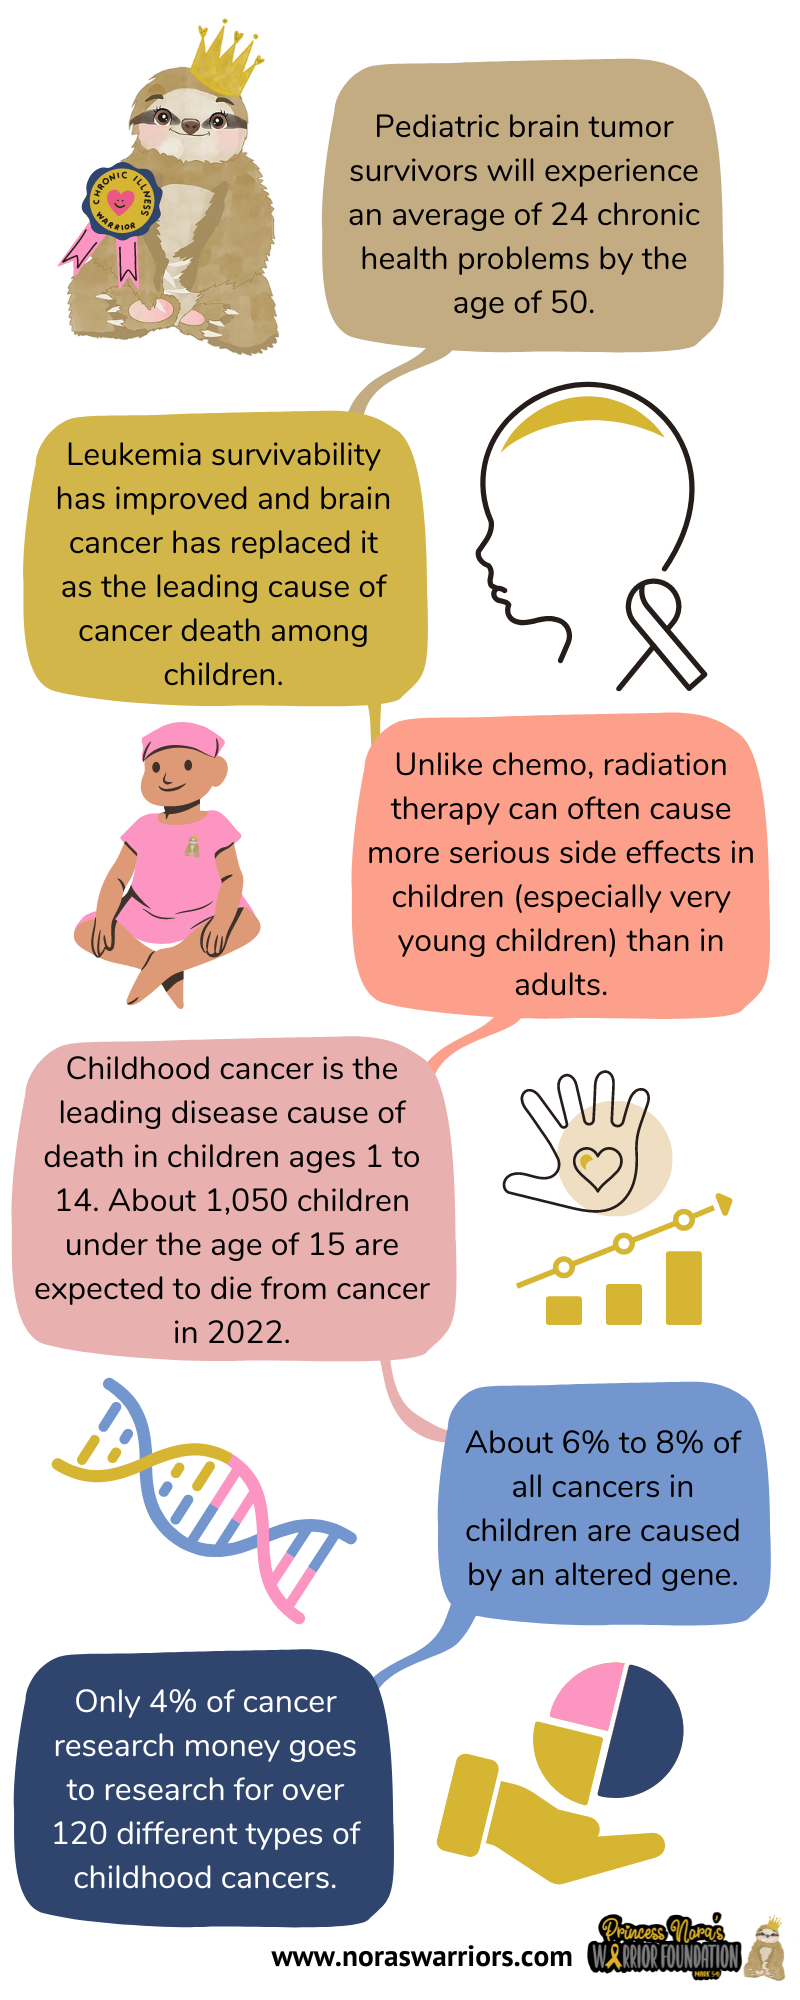 Facts About Childhood Cancer - Princess Nora's Warrior Foundation